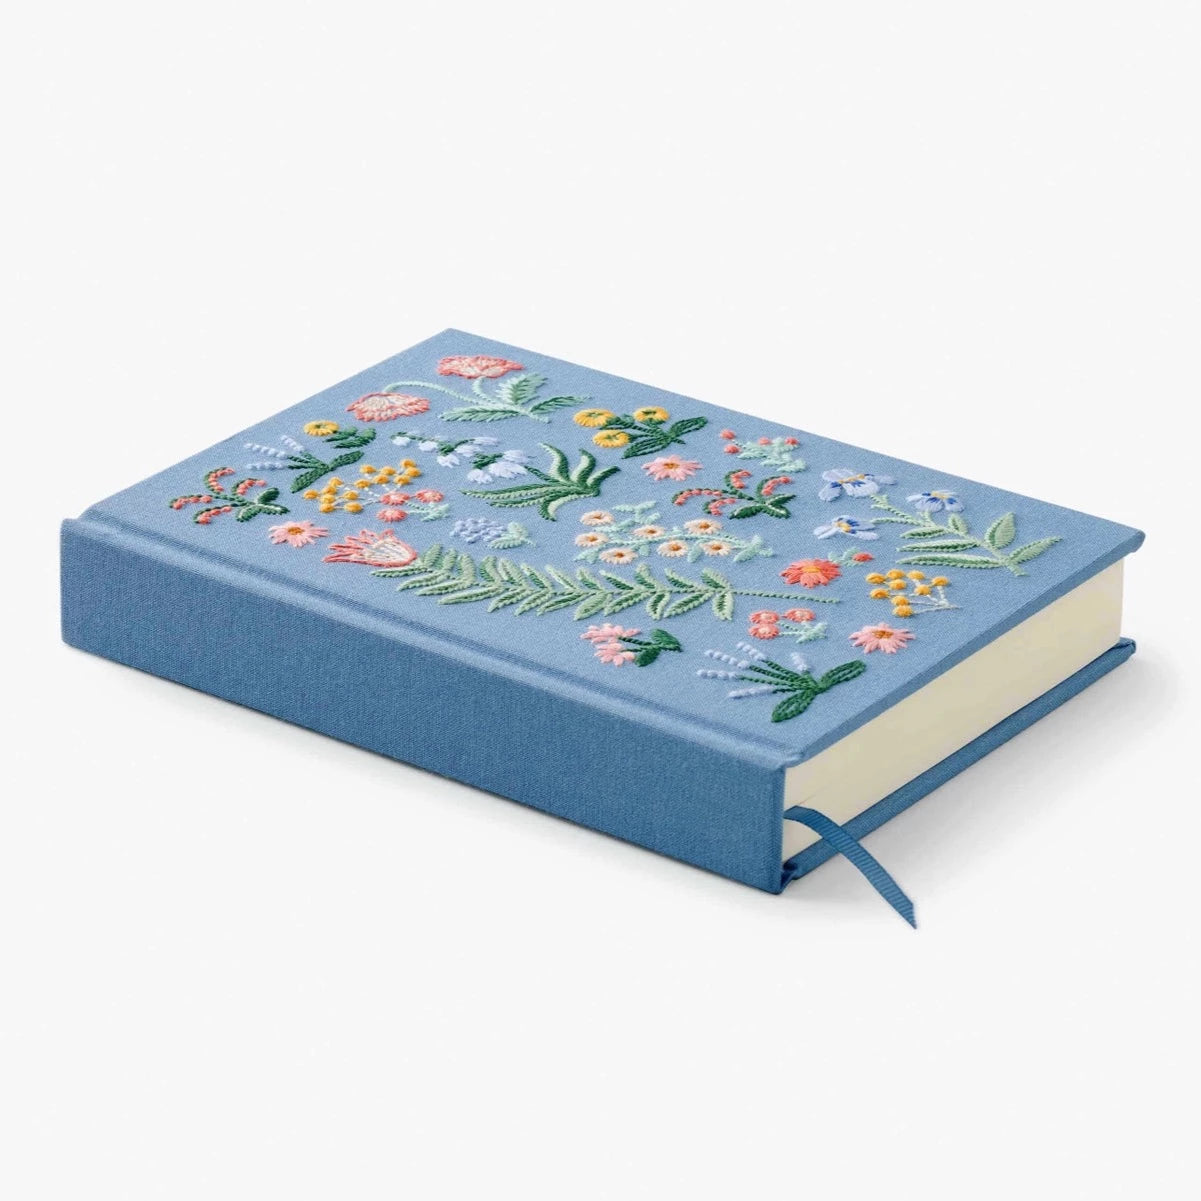 Side view of light blue fabric covered notebook.  Can see the blue bookmark and flowers on the top